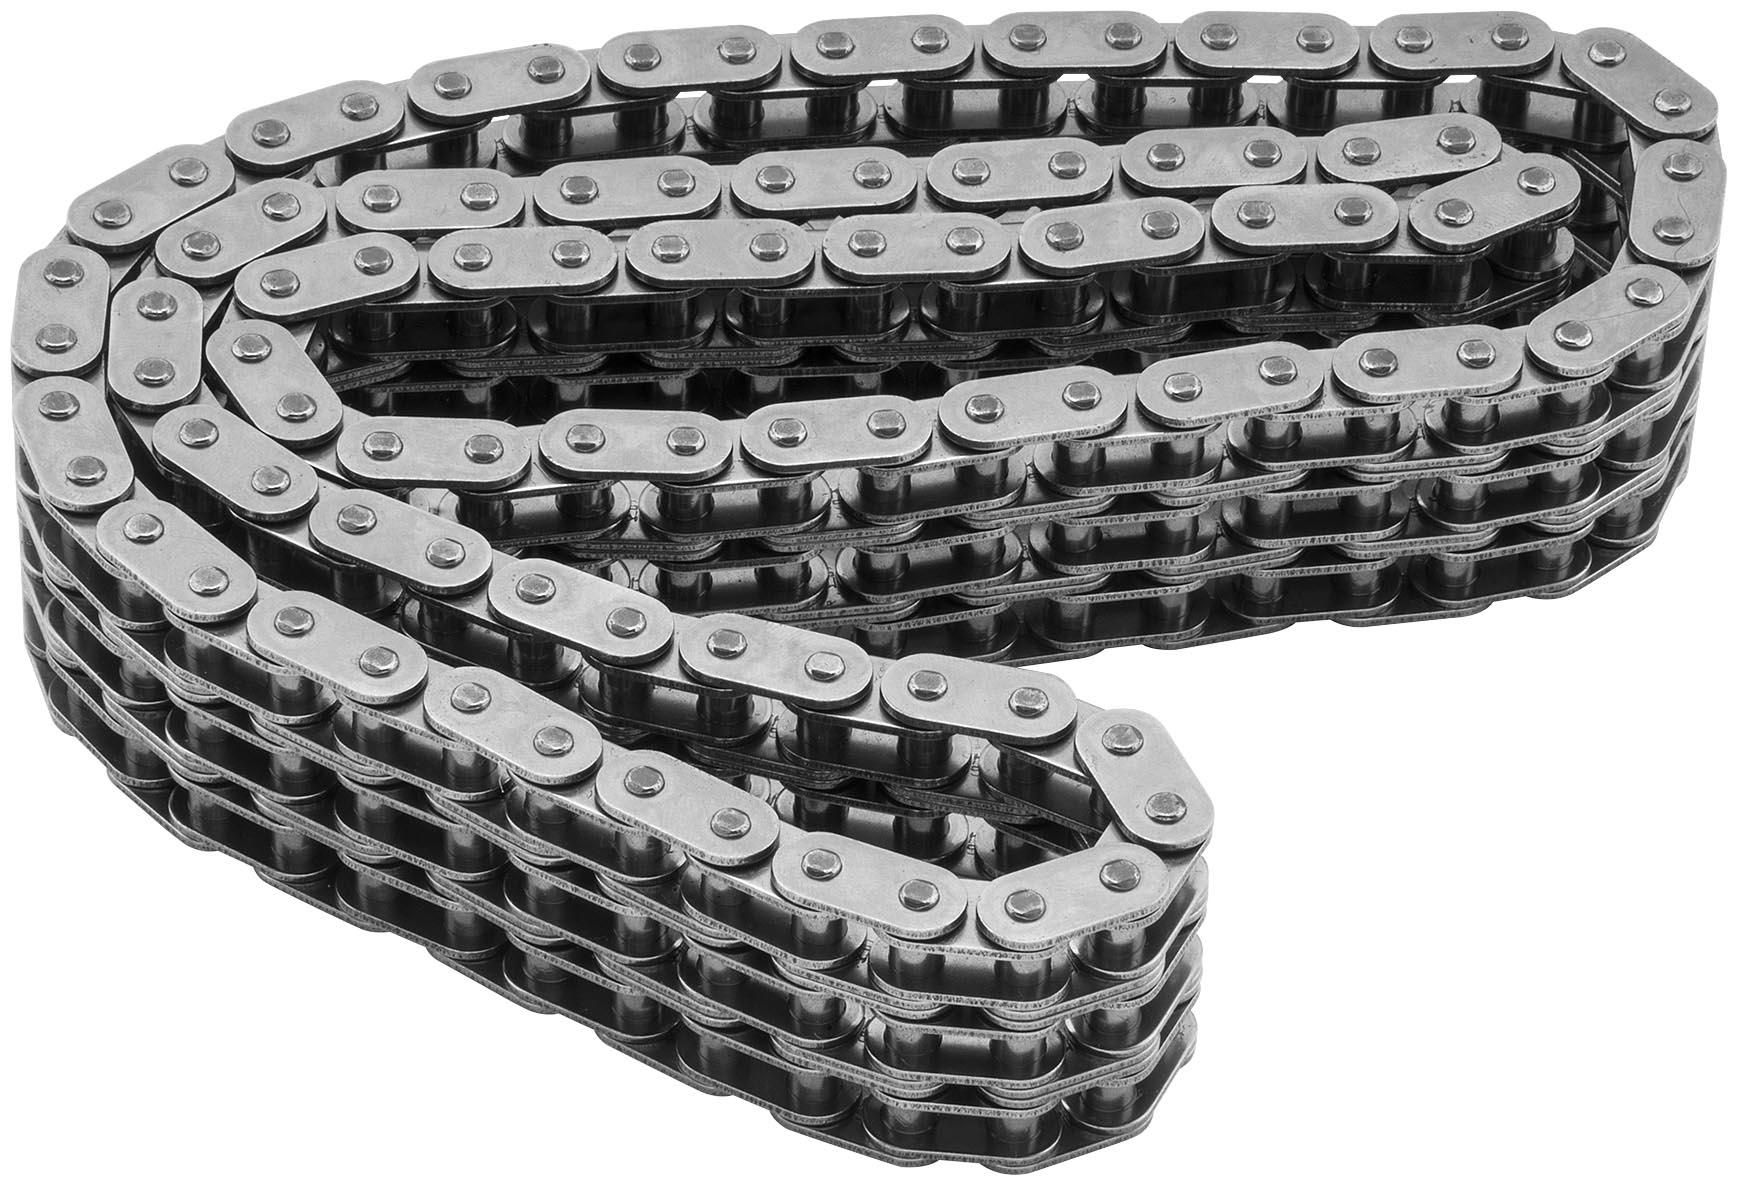 4RBZ-TWIN-POWER-VT-35A-3-94 Primary Chain - 94 Links